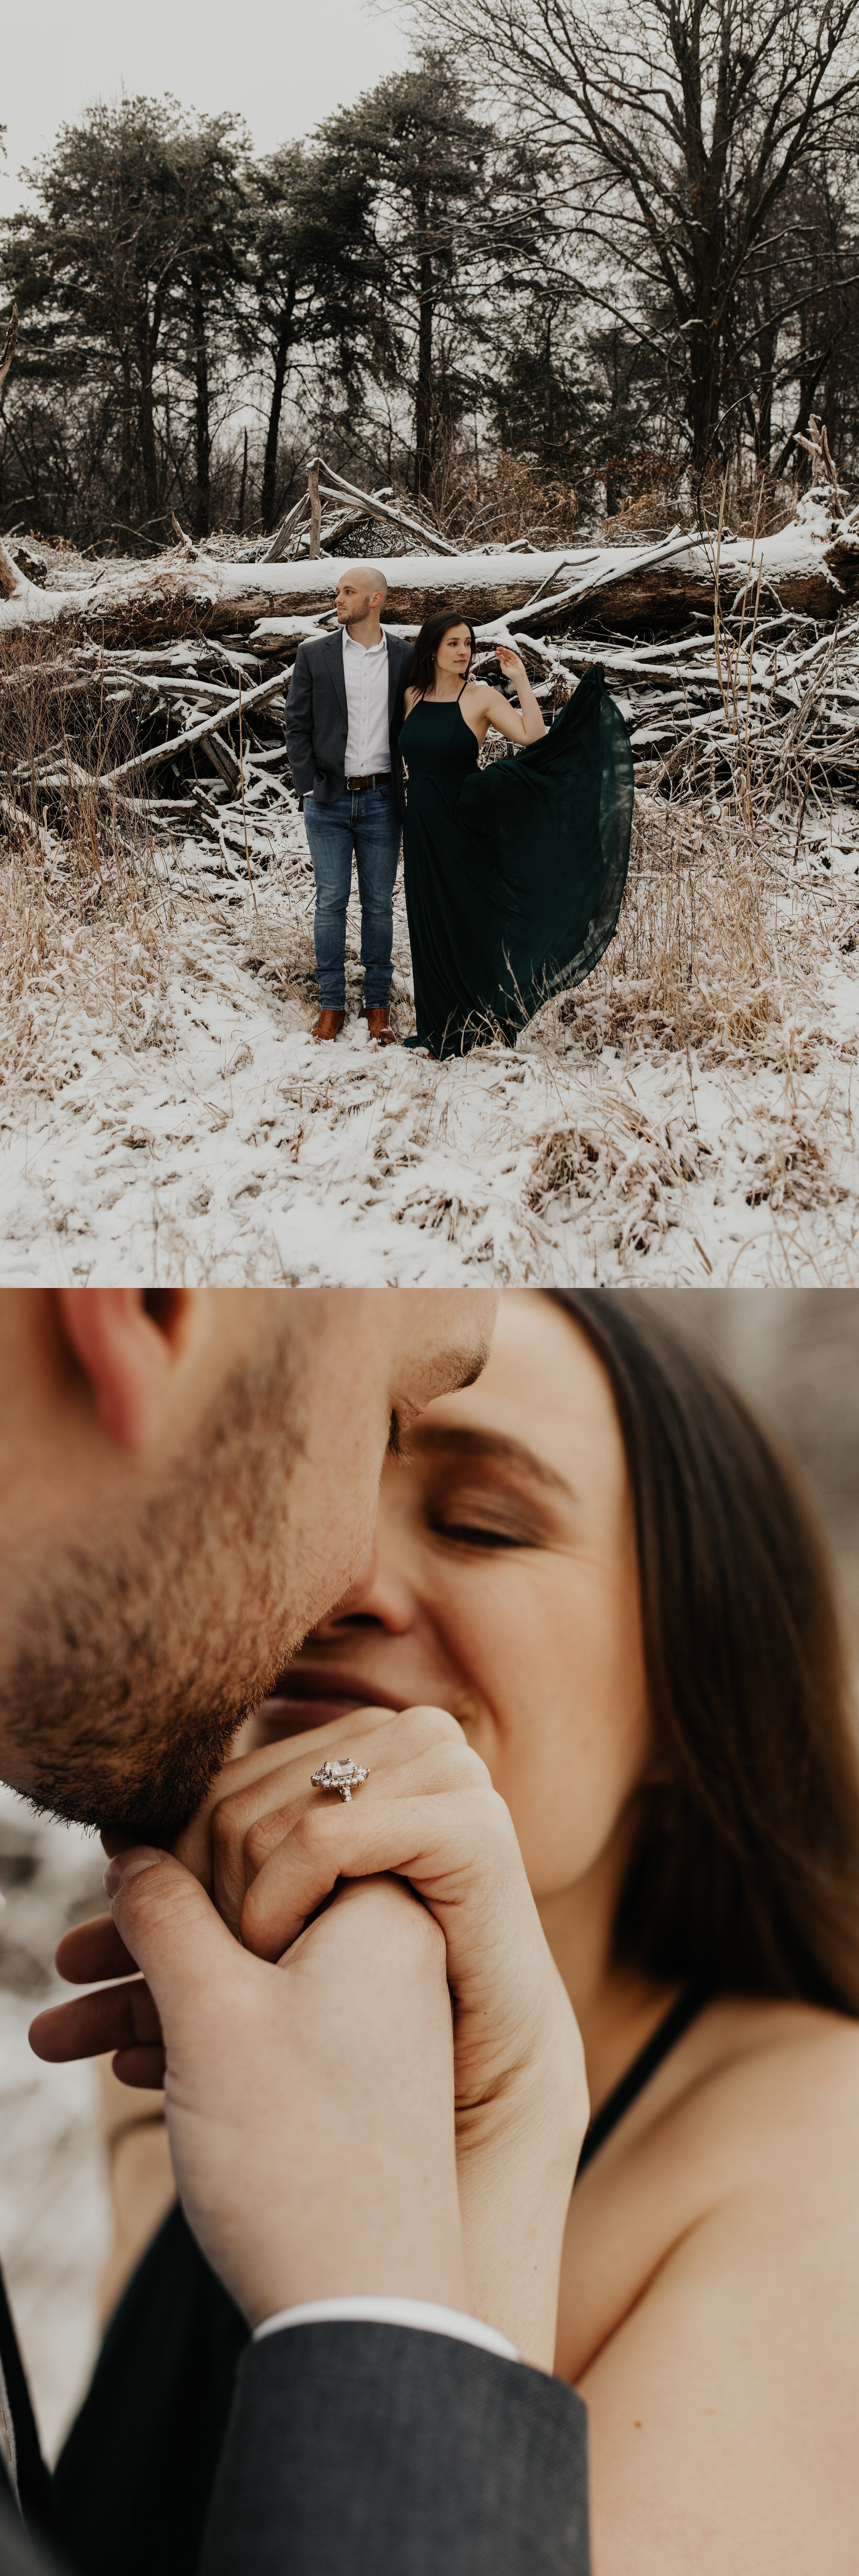 jessika-christine-photography-outdoor-engagement-couples-snow-adventurous-session (2).jpg